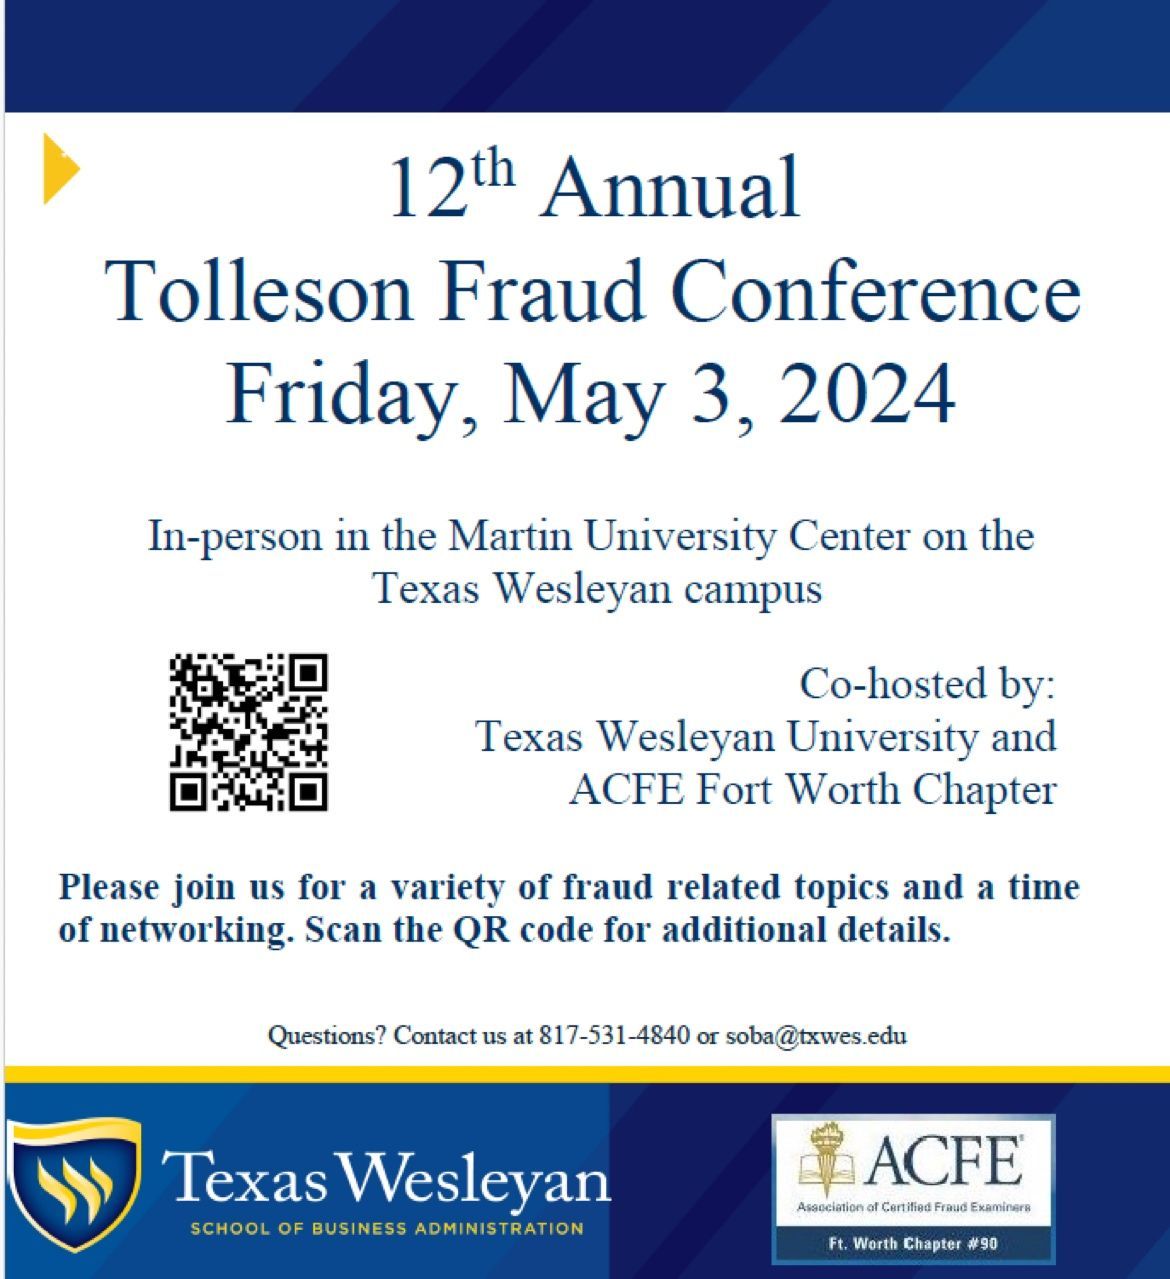 12th Annual Tolleson Fraud Conference